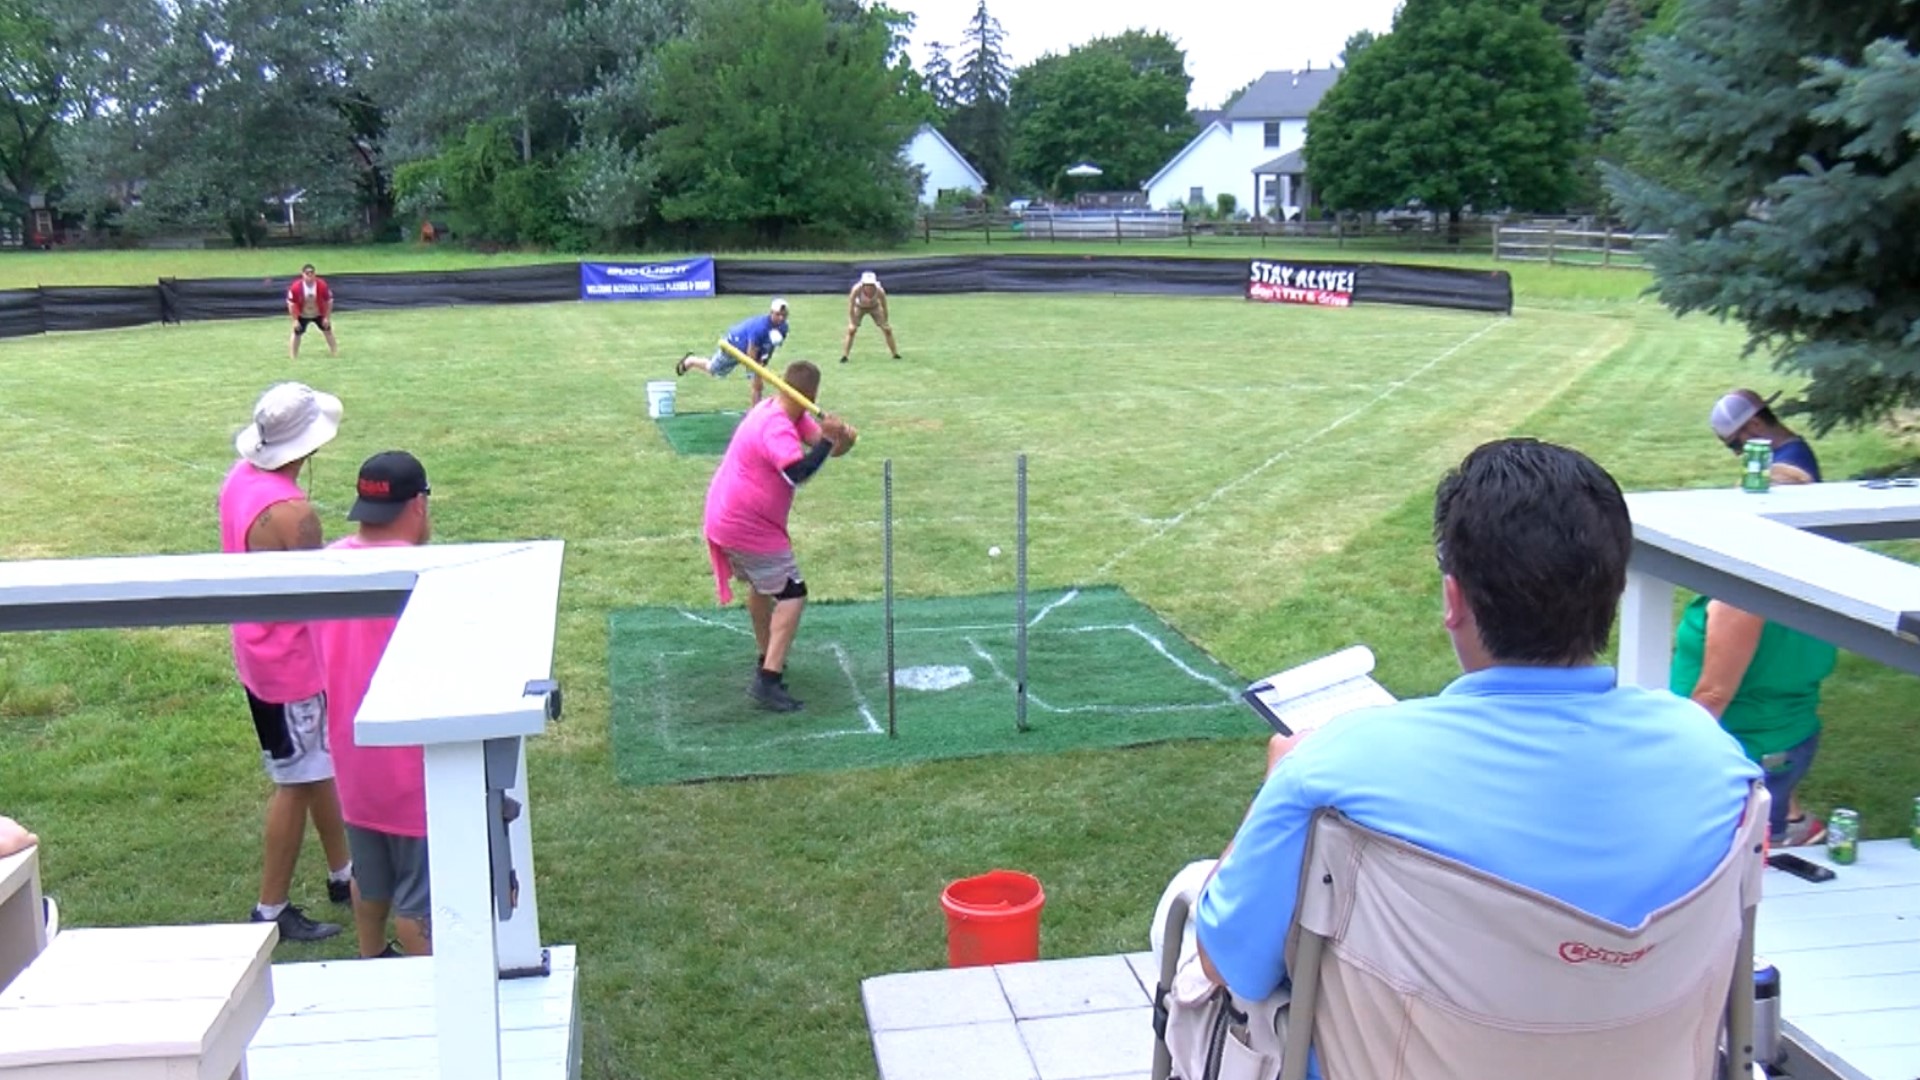 The backyard Wiffle ball tournament has been going strong for 11 years, providing fun, but also giving back to charities.